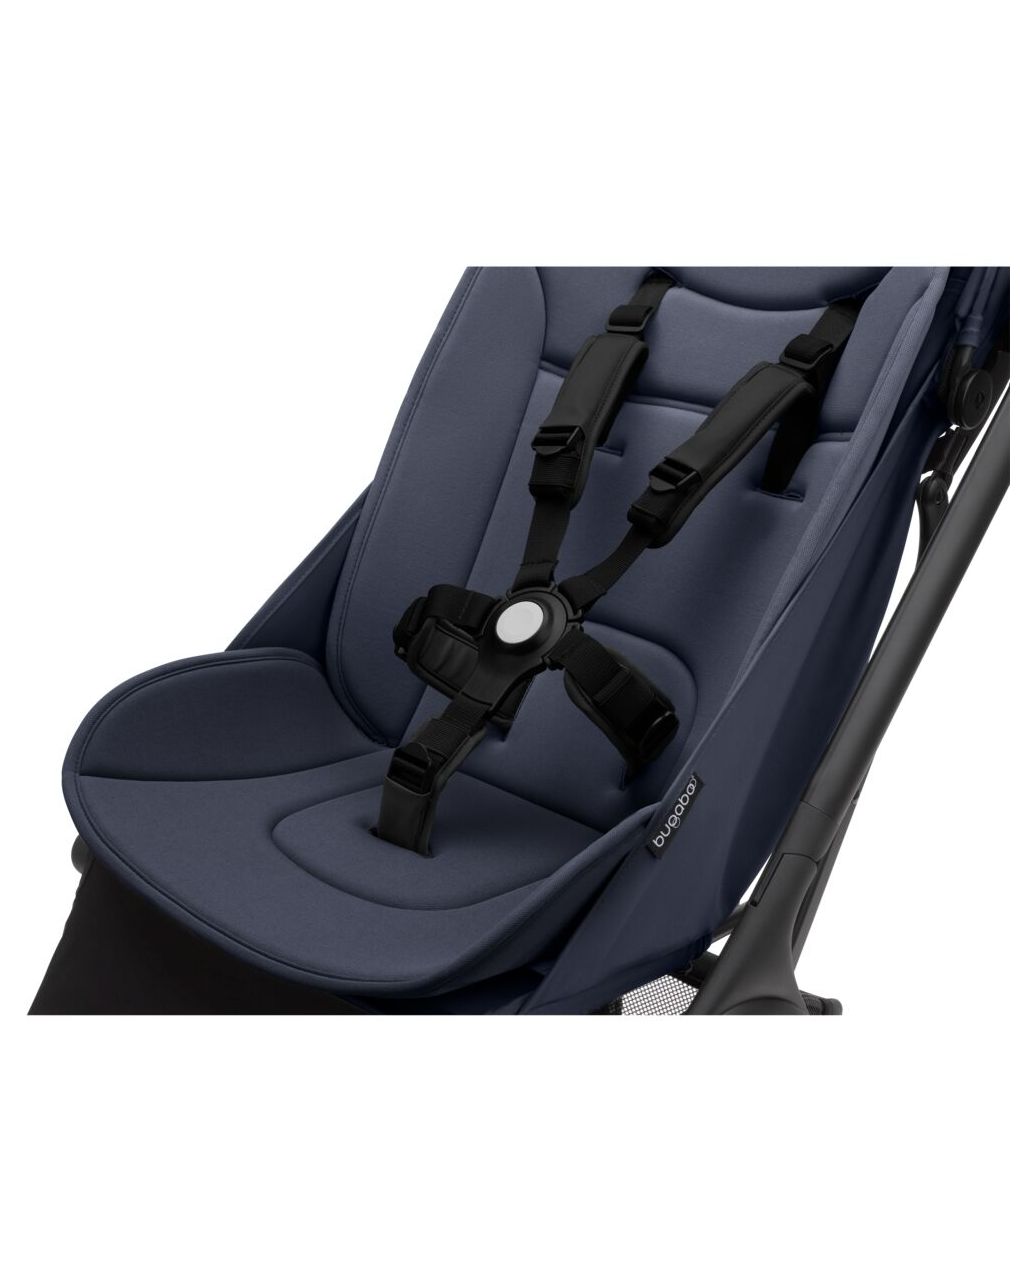 Bugaboo butterfly black/stormy blue - s - Bugaboo